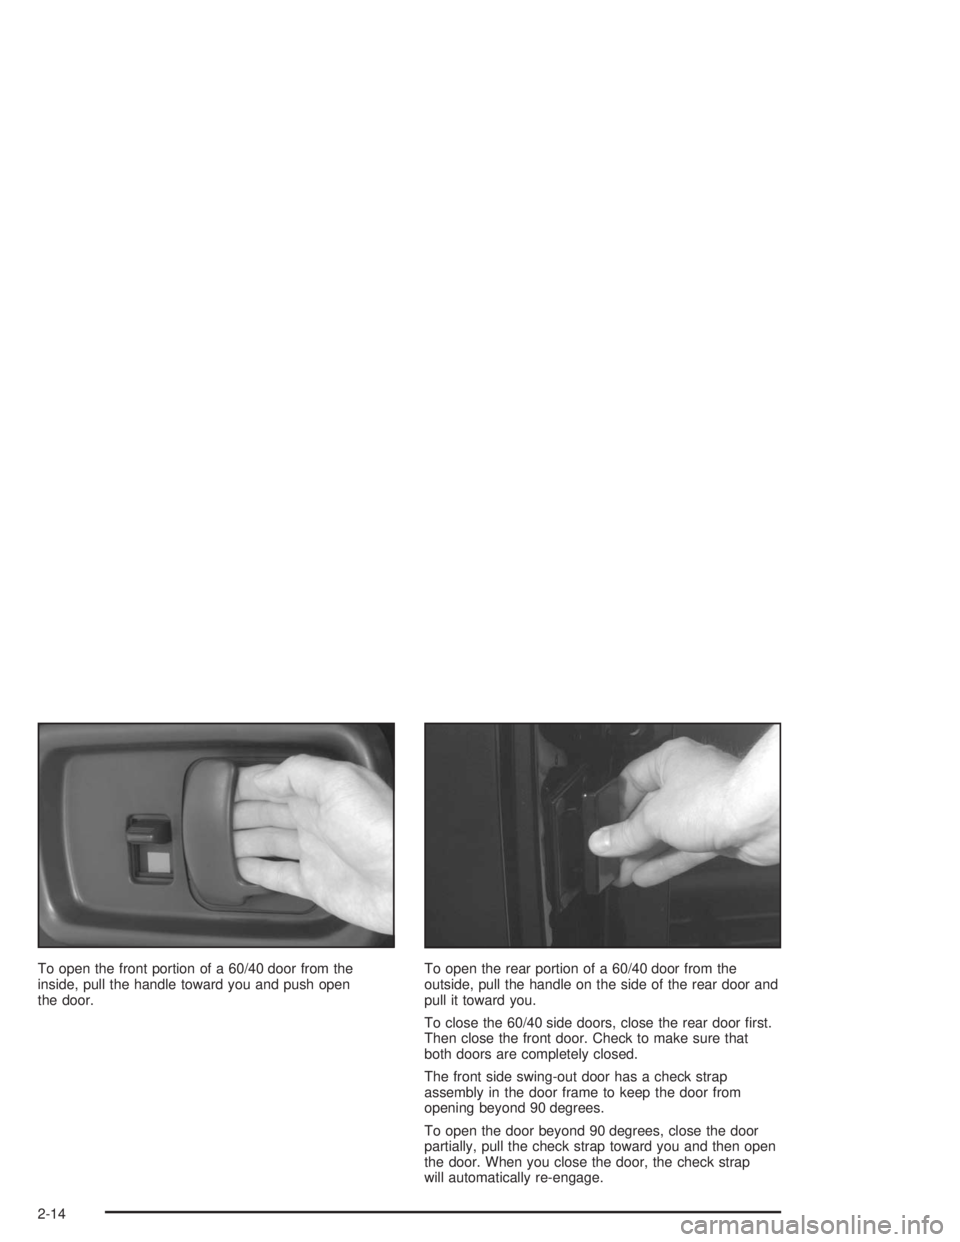 GMC SAVANA 2004  Owners Manual To open the front portion of a 60/40 door from the
inside, pull the handle toward you and push open
the door.To open the rear portion of a 60/40 door from the
outside, pull the handle on the side of t